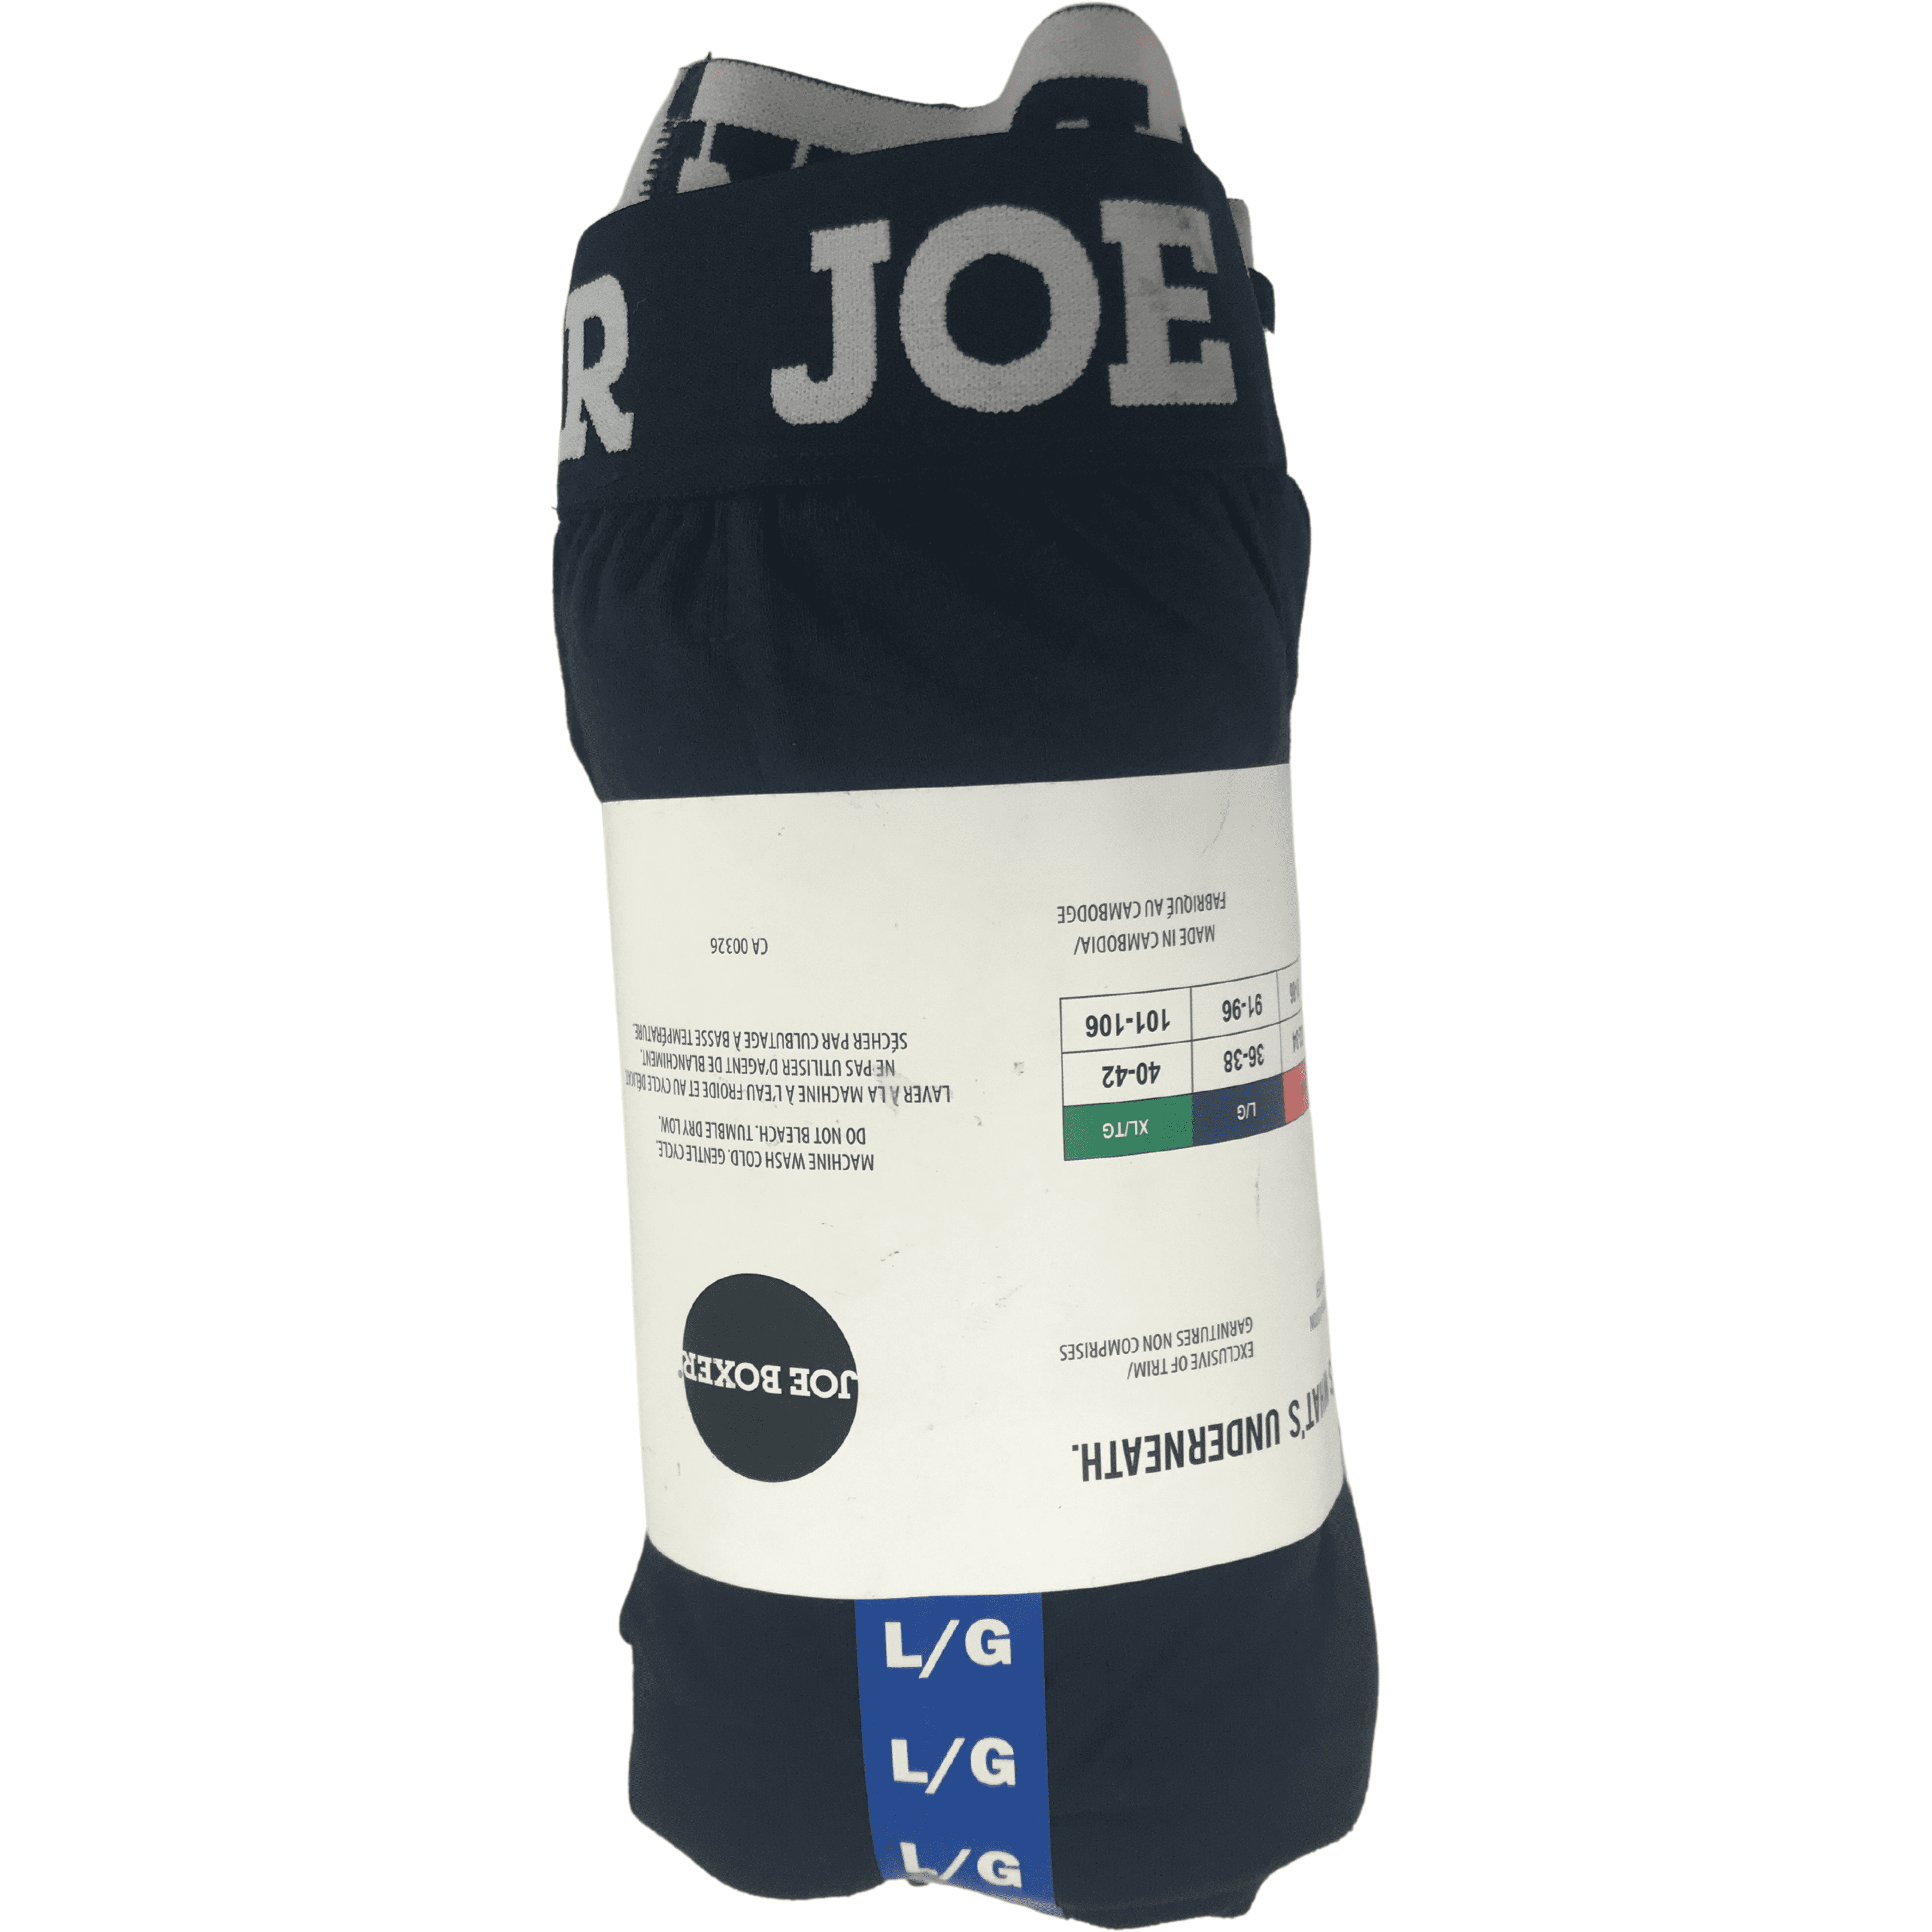 https://www.canadawideliquidations.com/wp-content/uploads/2021/10/products-joeboxer02.png